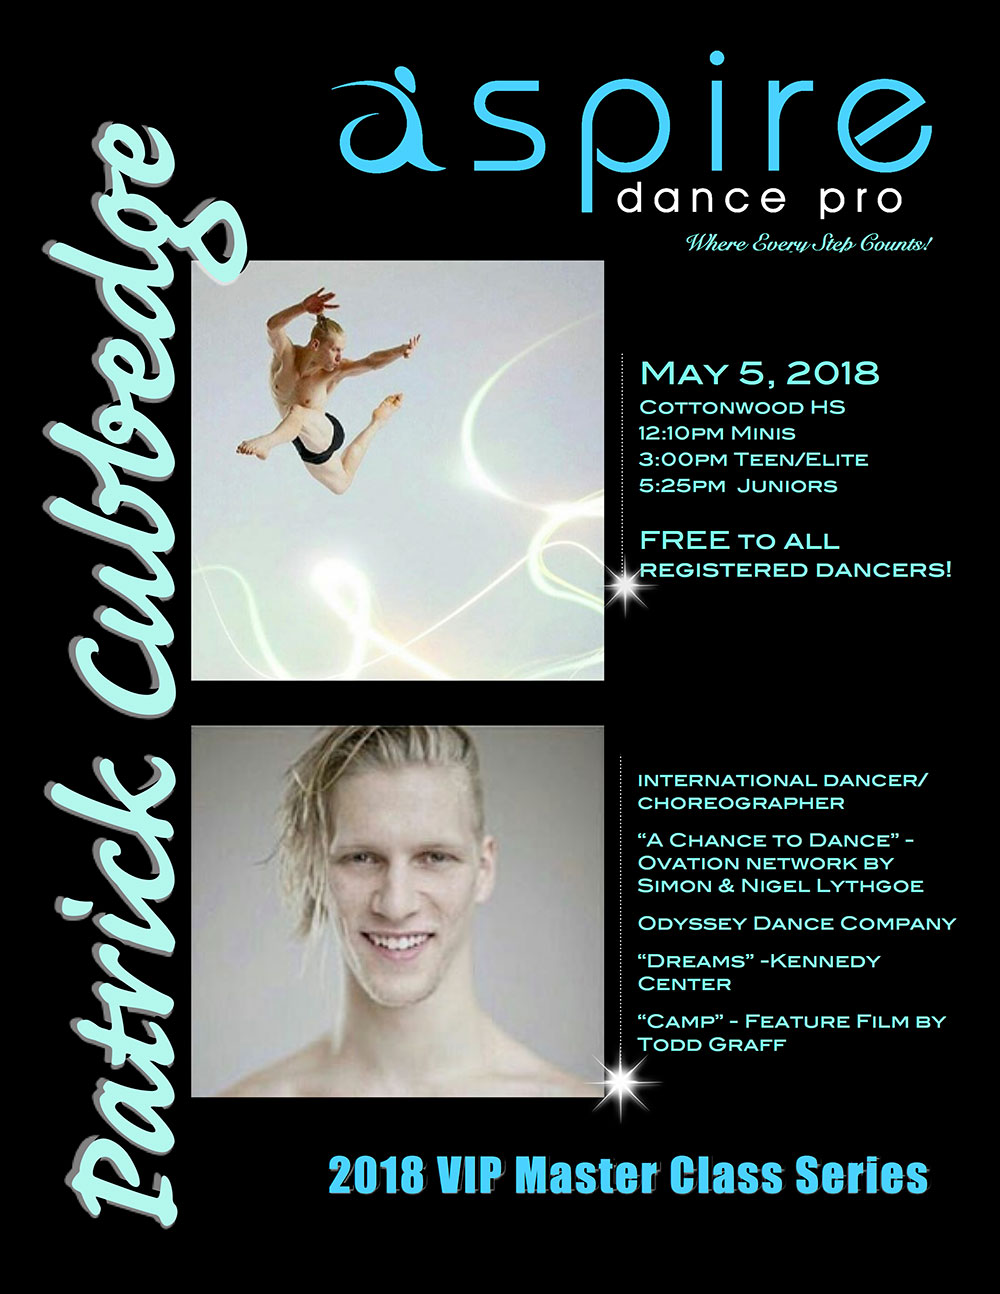 Patrick Cubbedge - Aspire Dance Pro Competitions Masterclass Instructor